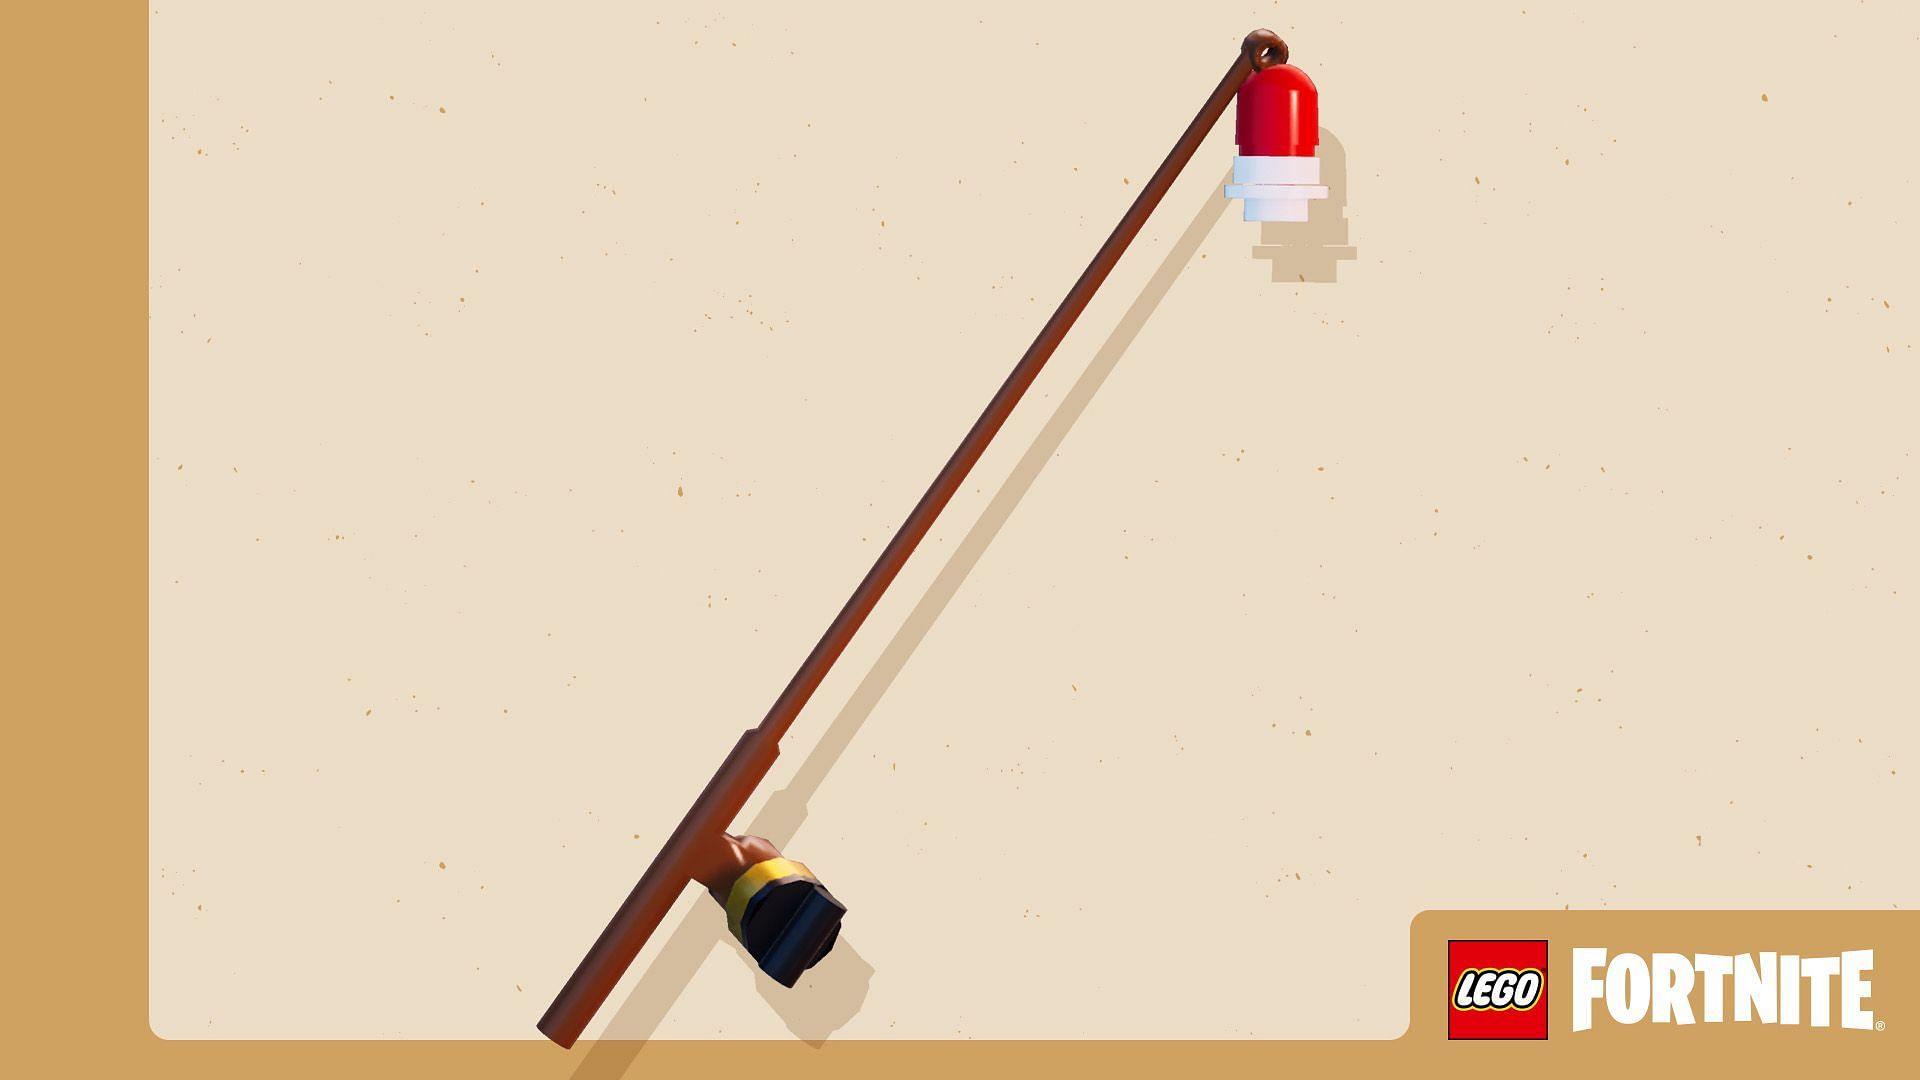 Fishing Rod is used to catch fish in LEGO Fortnite (Image via Epic Games)